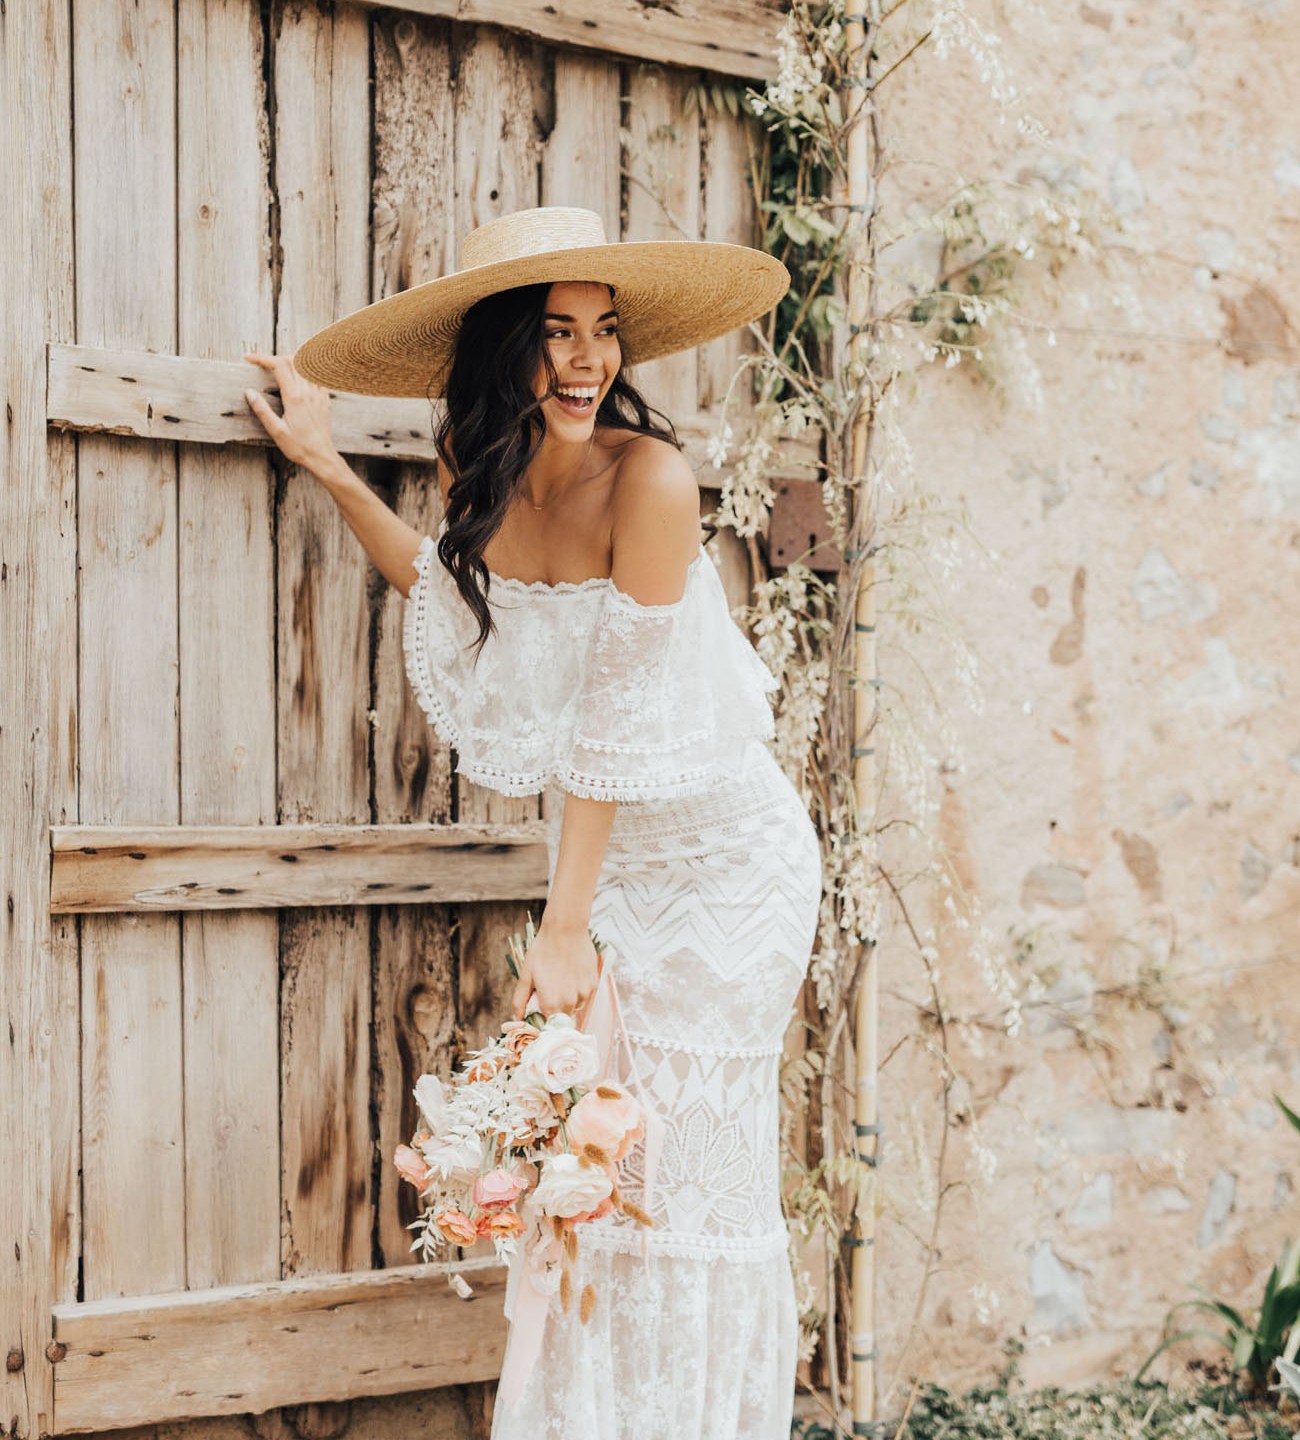 This gorgeous wedding shoot featured two couples and various aesthetics   boho and edgy